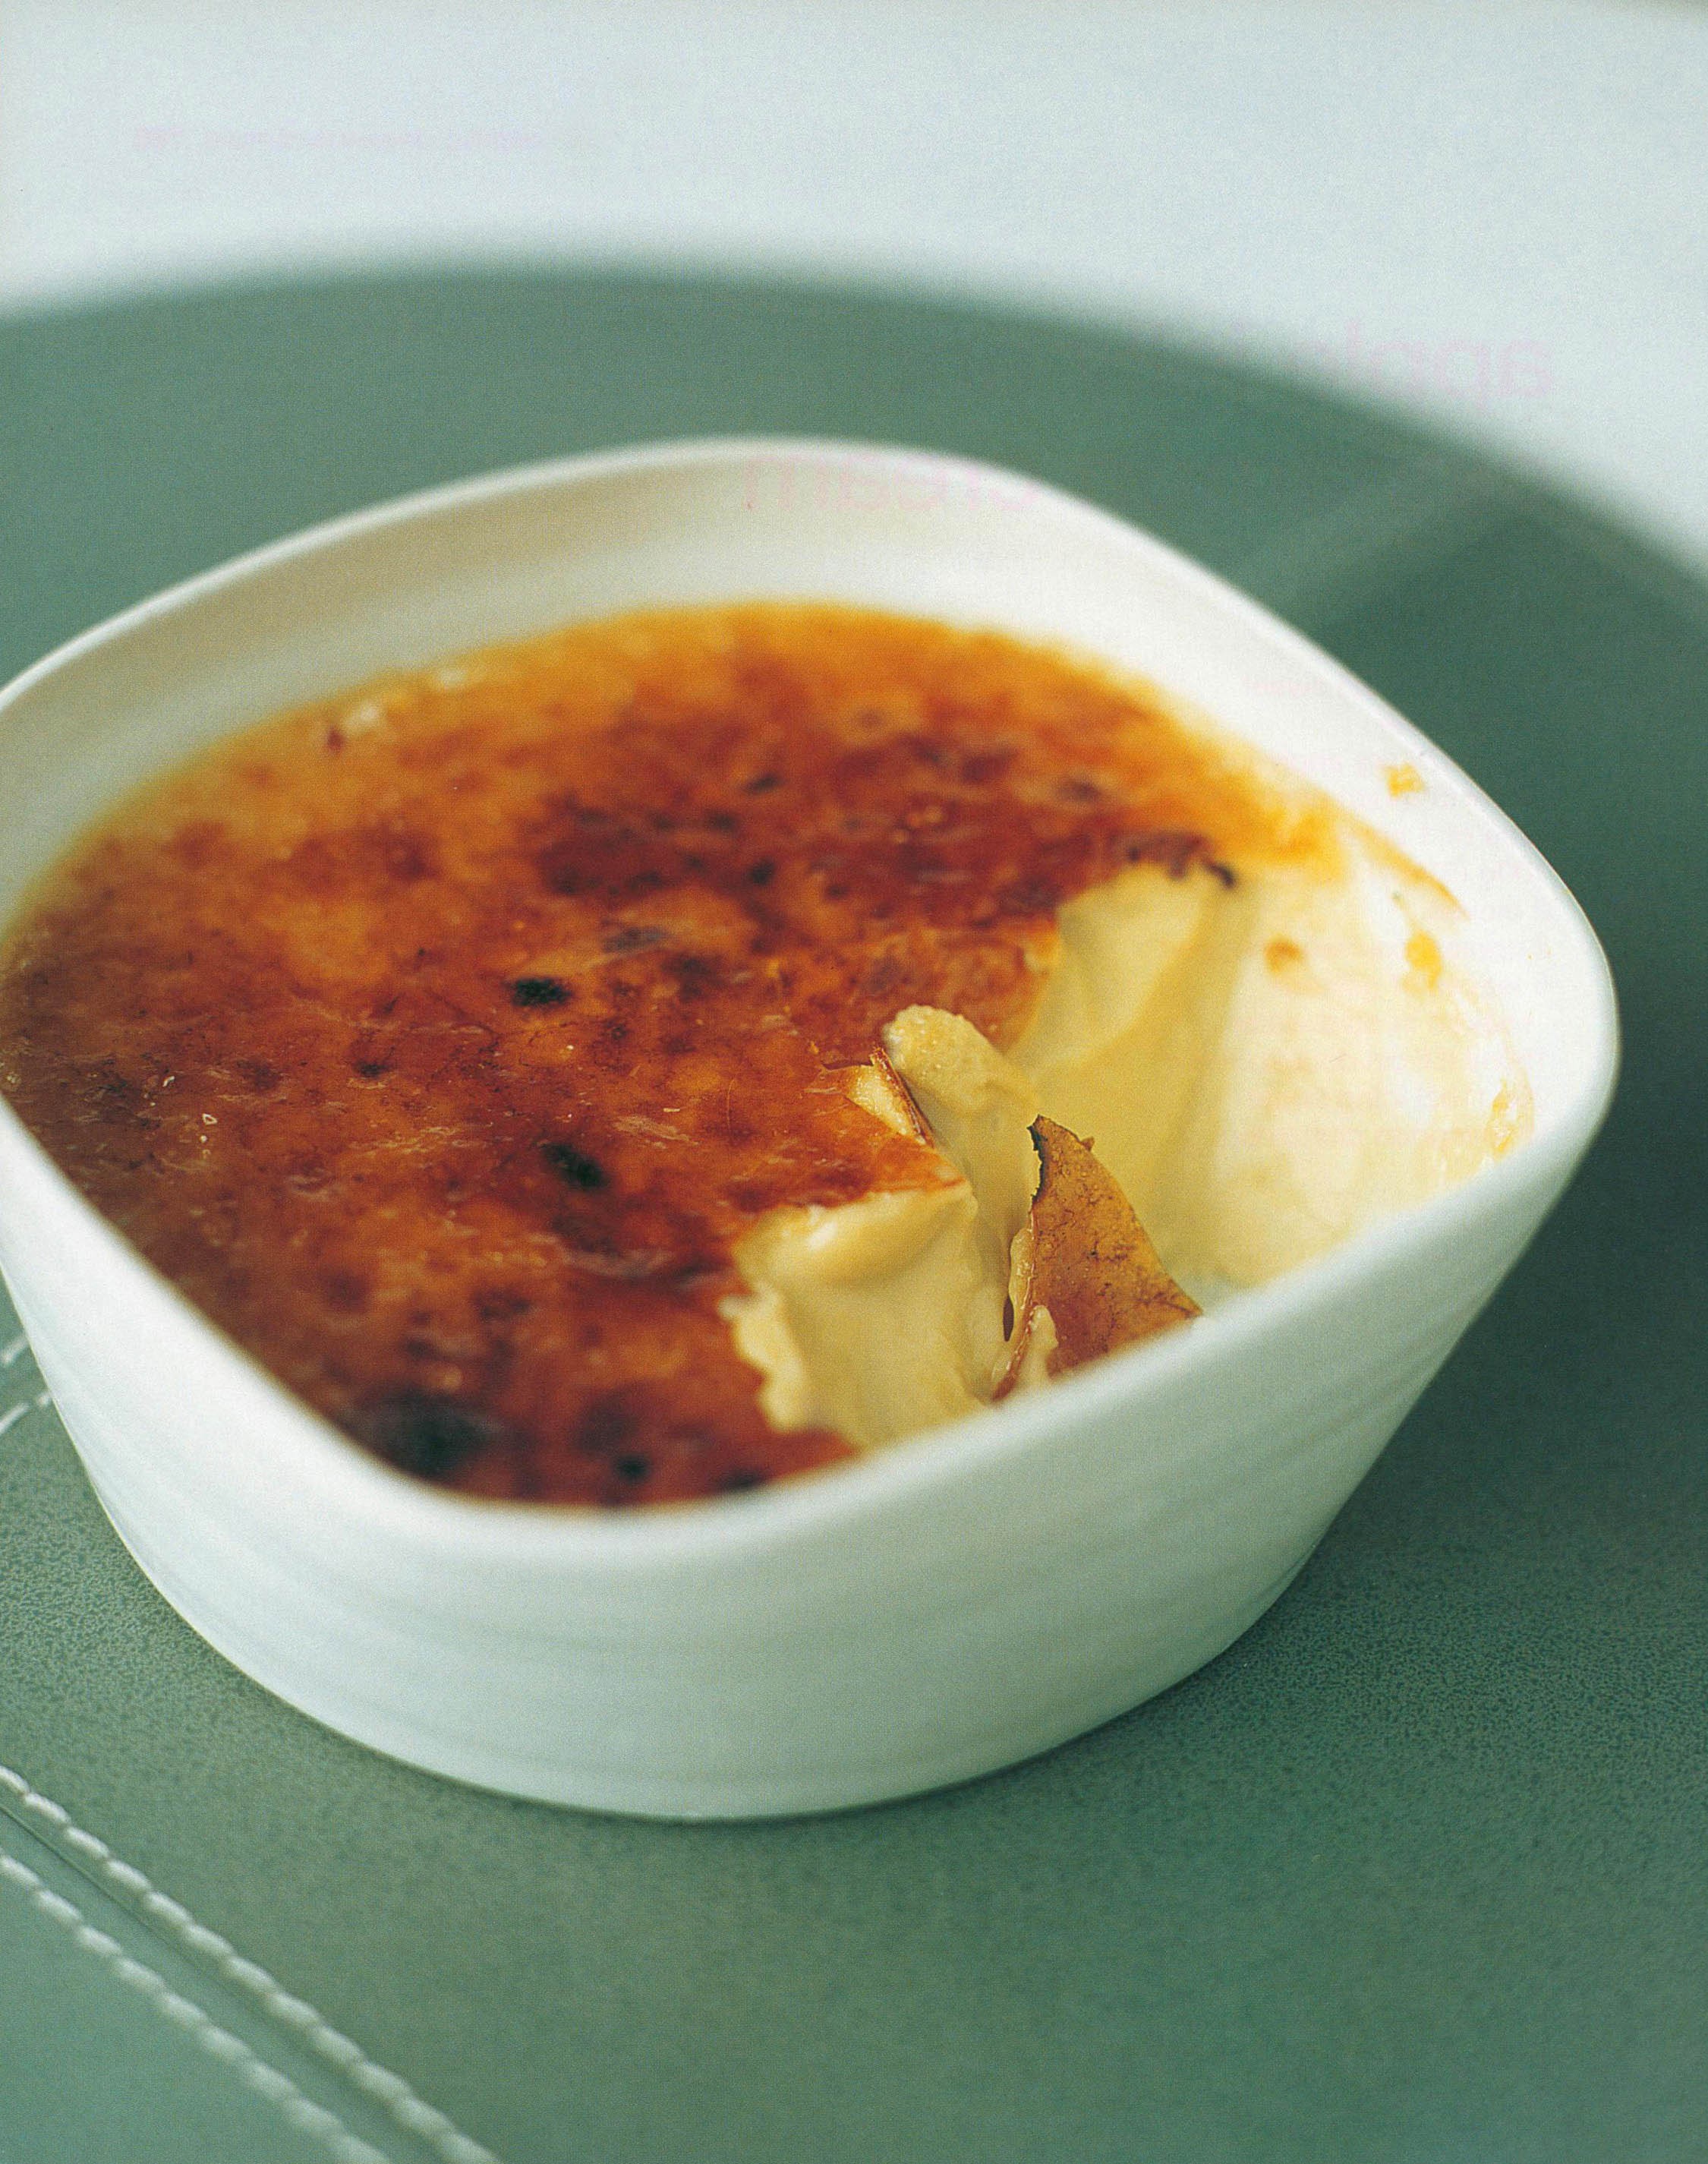 Bailey’s Crème Brûlée from Keeping it Simple by Gary Rhodes